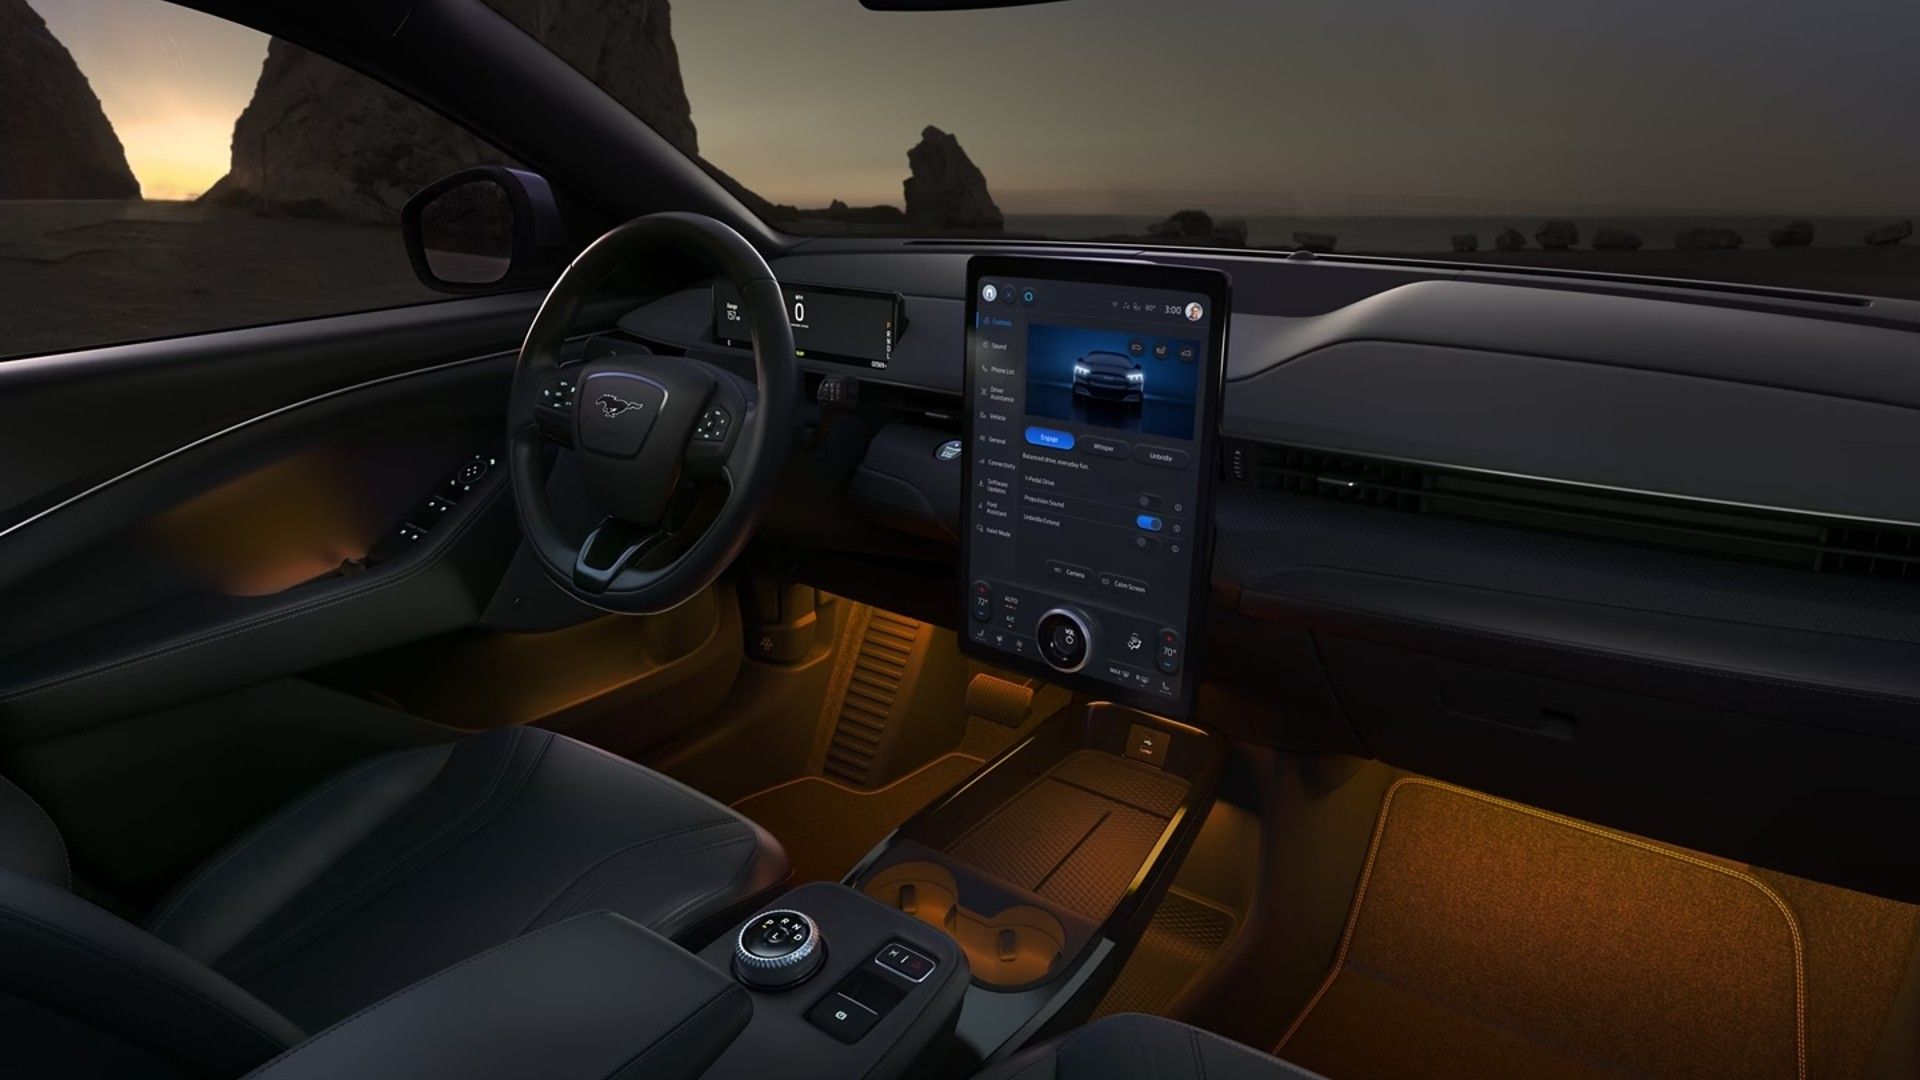 15.5-inch touchscreen display of a 2023 Ford Mustang Mach-E